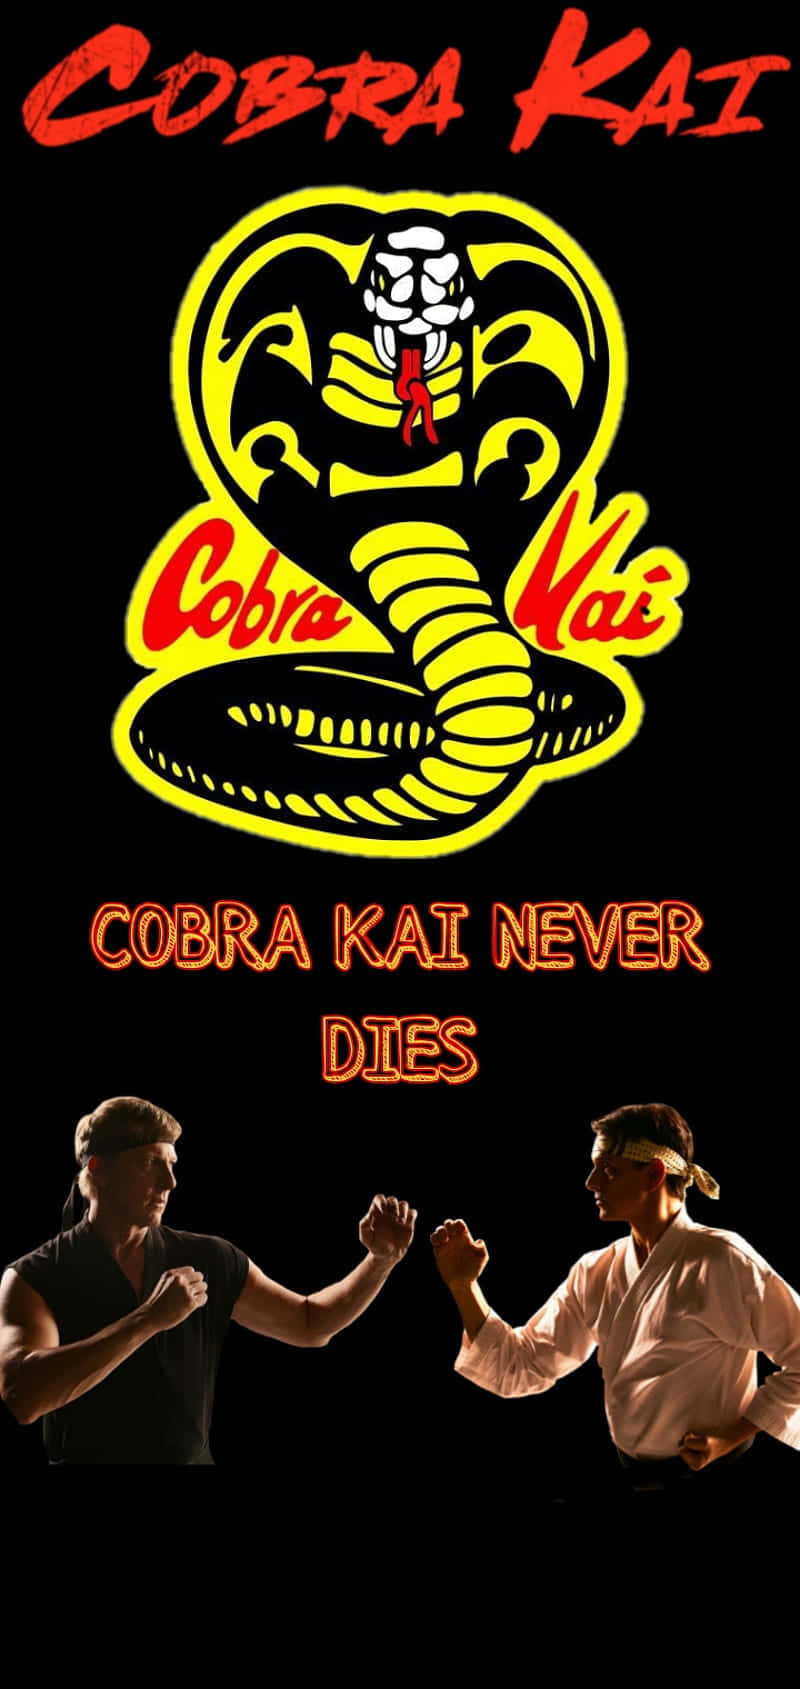 "Rise Up with this Official Cobra Kai iPhone Xr Background"